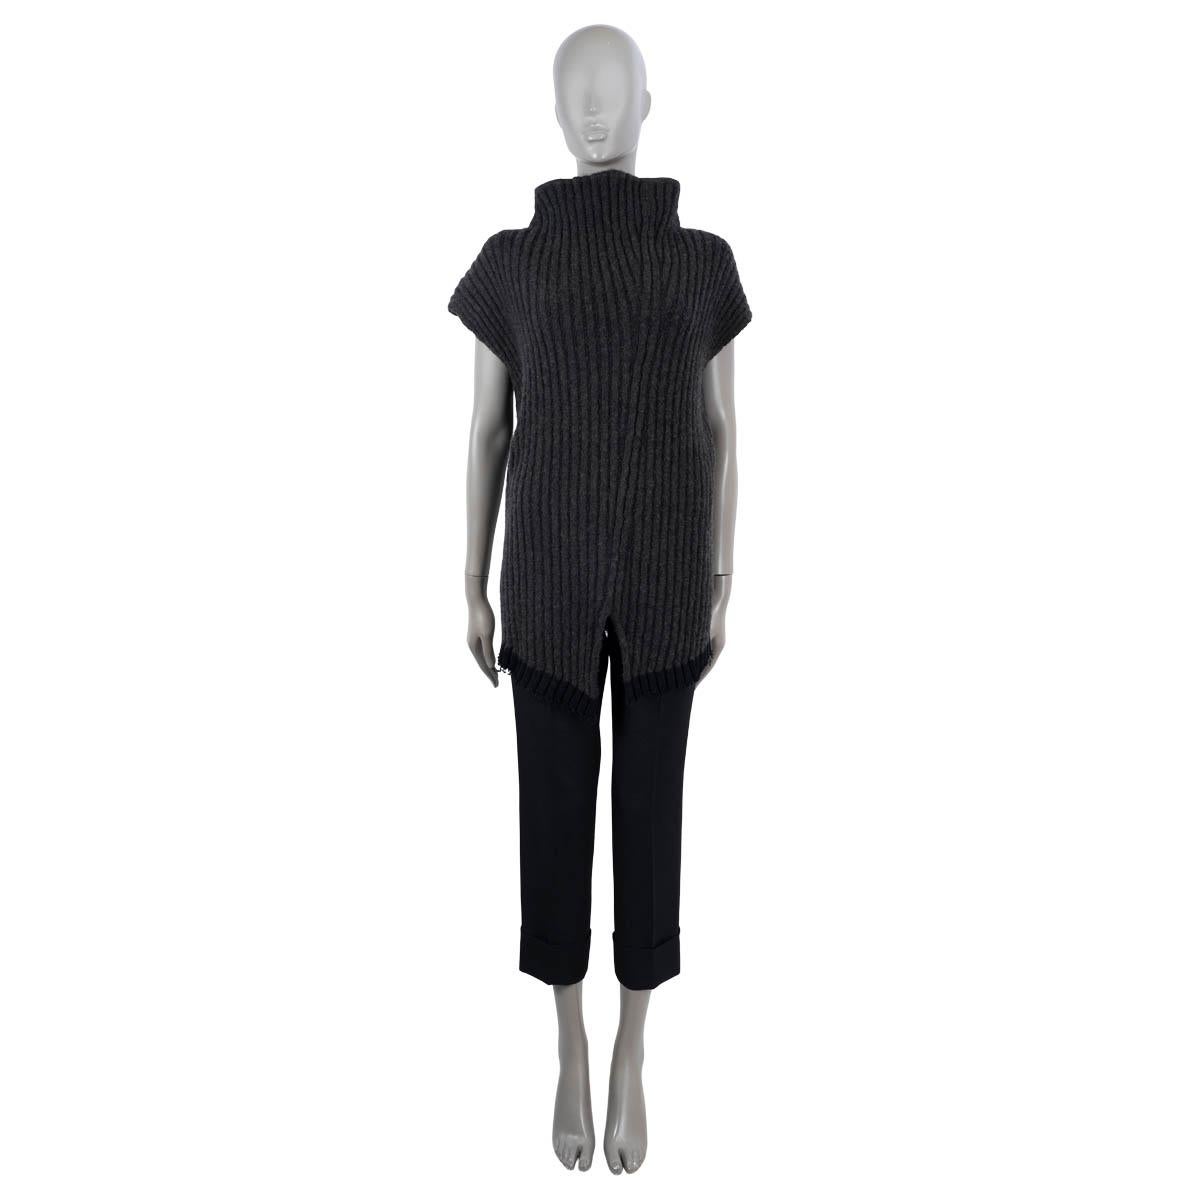 100% authentic The Row Damiano sleeveless sweater in charcoal grey rib-knit bouclé cotton (55%), polyamide (17%), cashmere (16%), silk (11%) and elastane (1%). Features a wide turtleneck, cap sleeves and split hem on the front. Has been worn and is